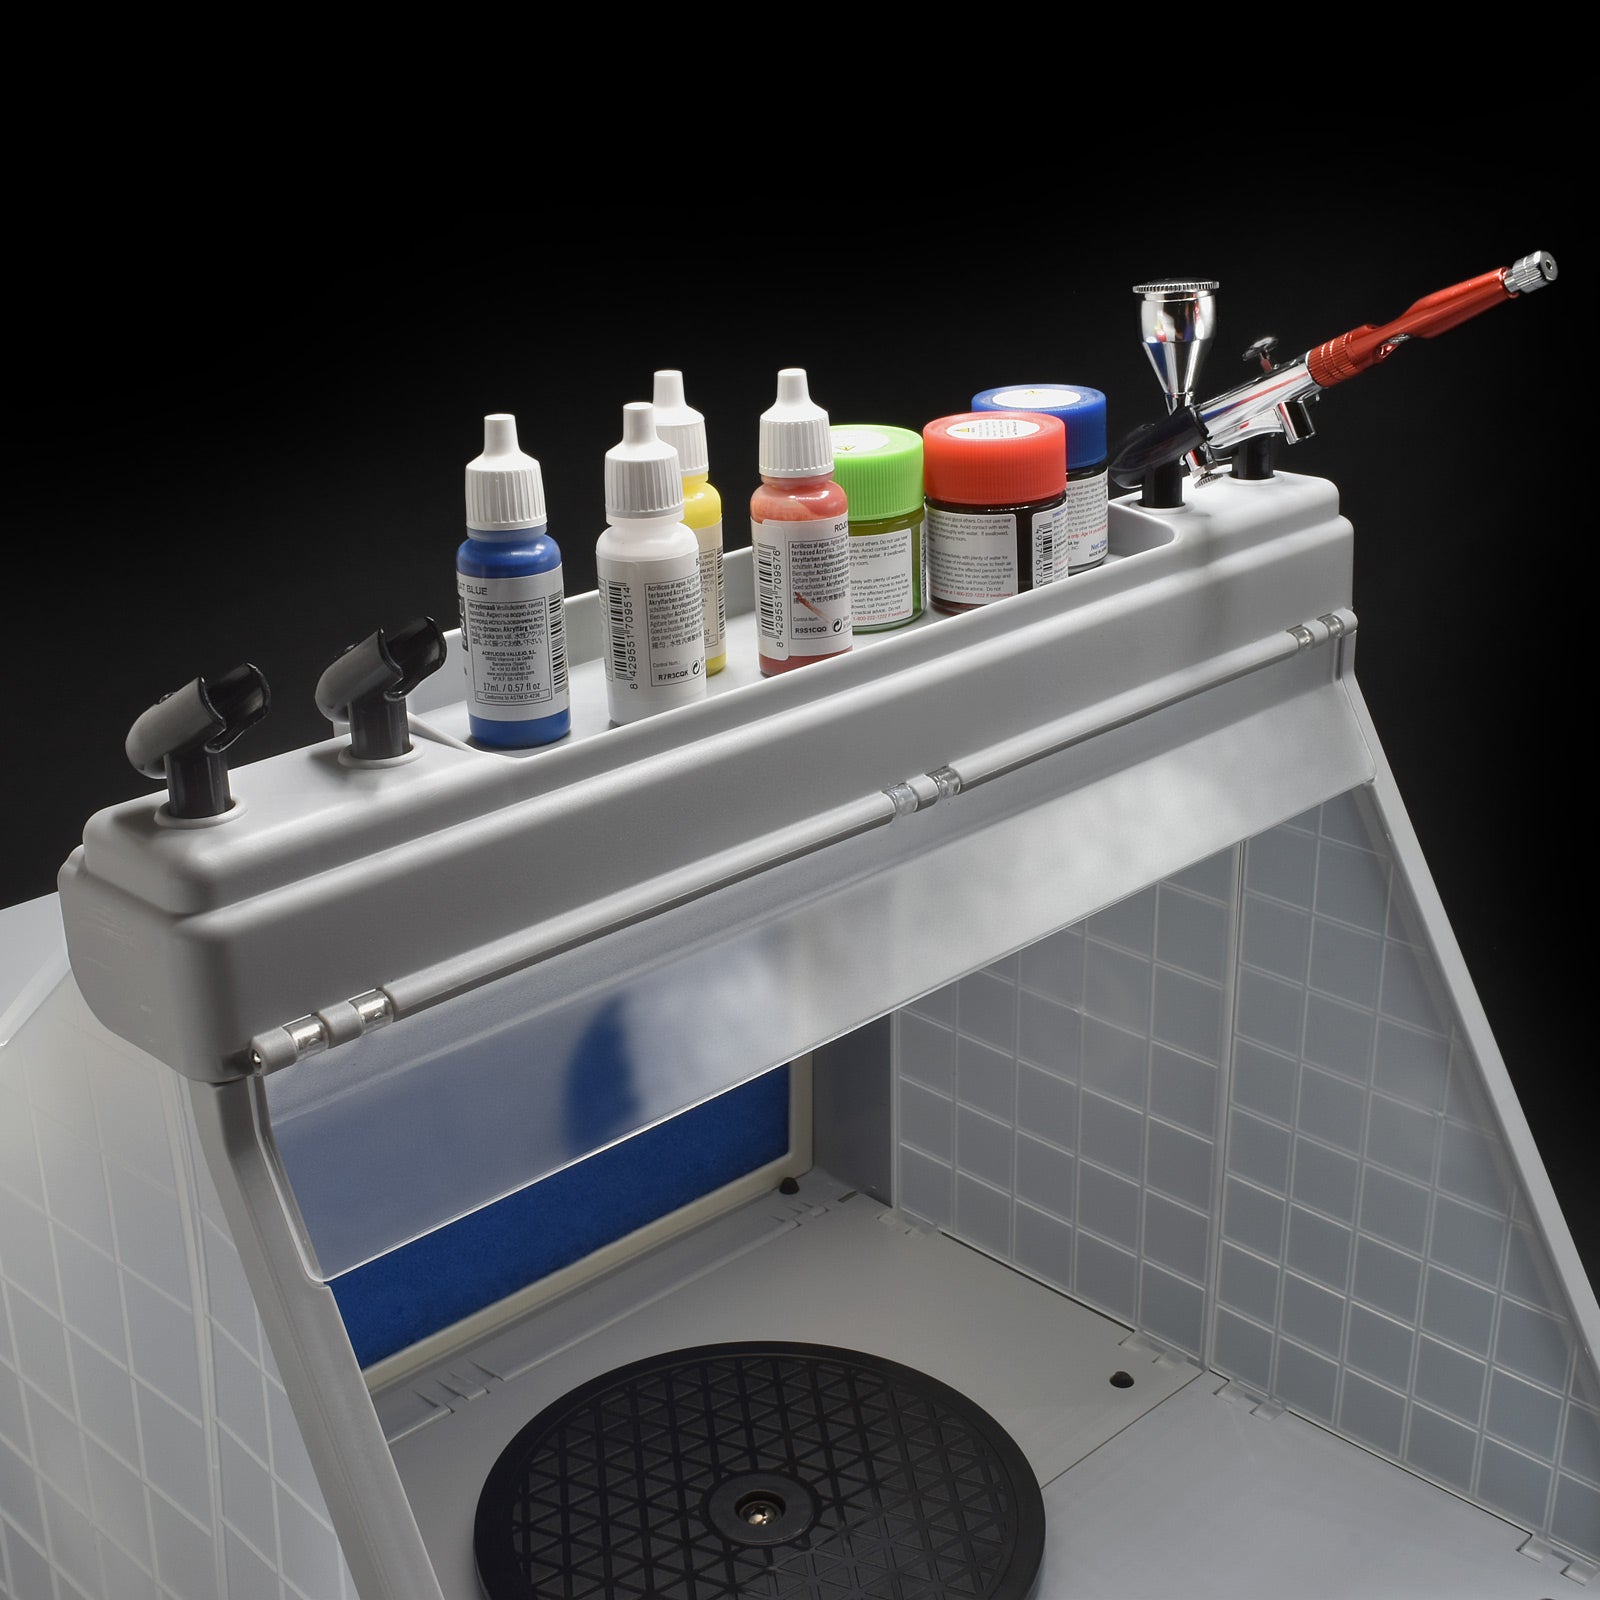 Airbrush Holder & Tray Attachment for Fold Up Spray Booth